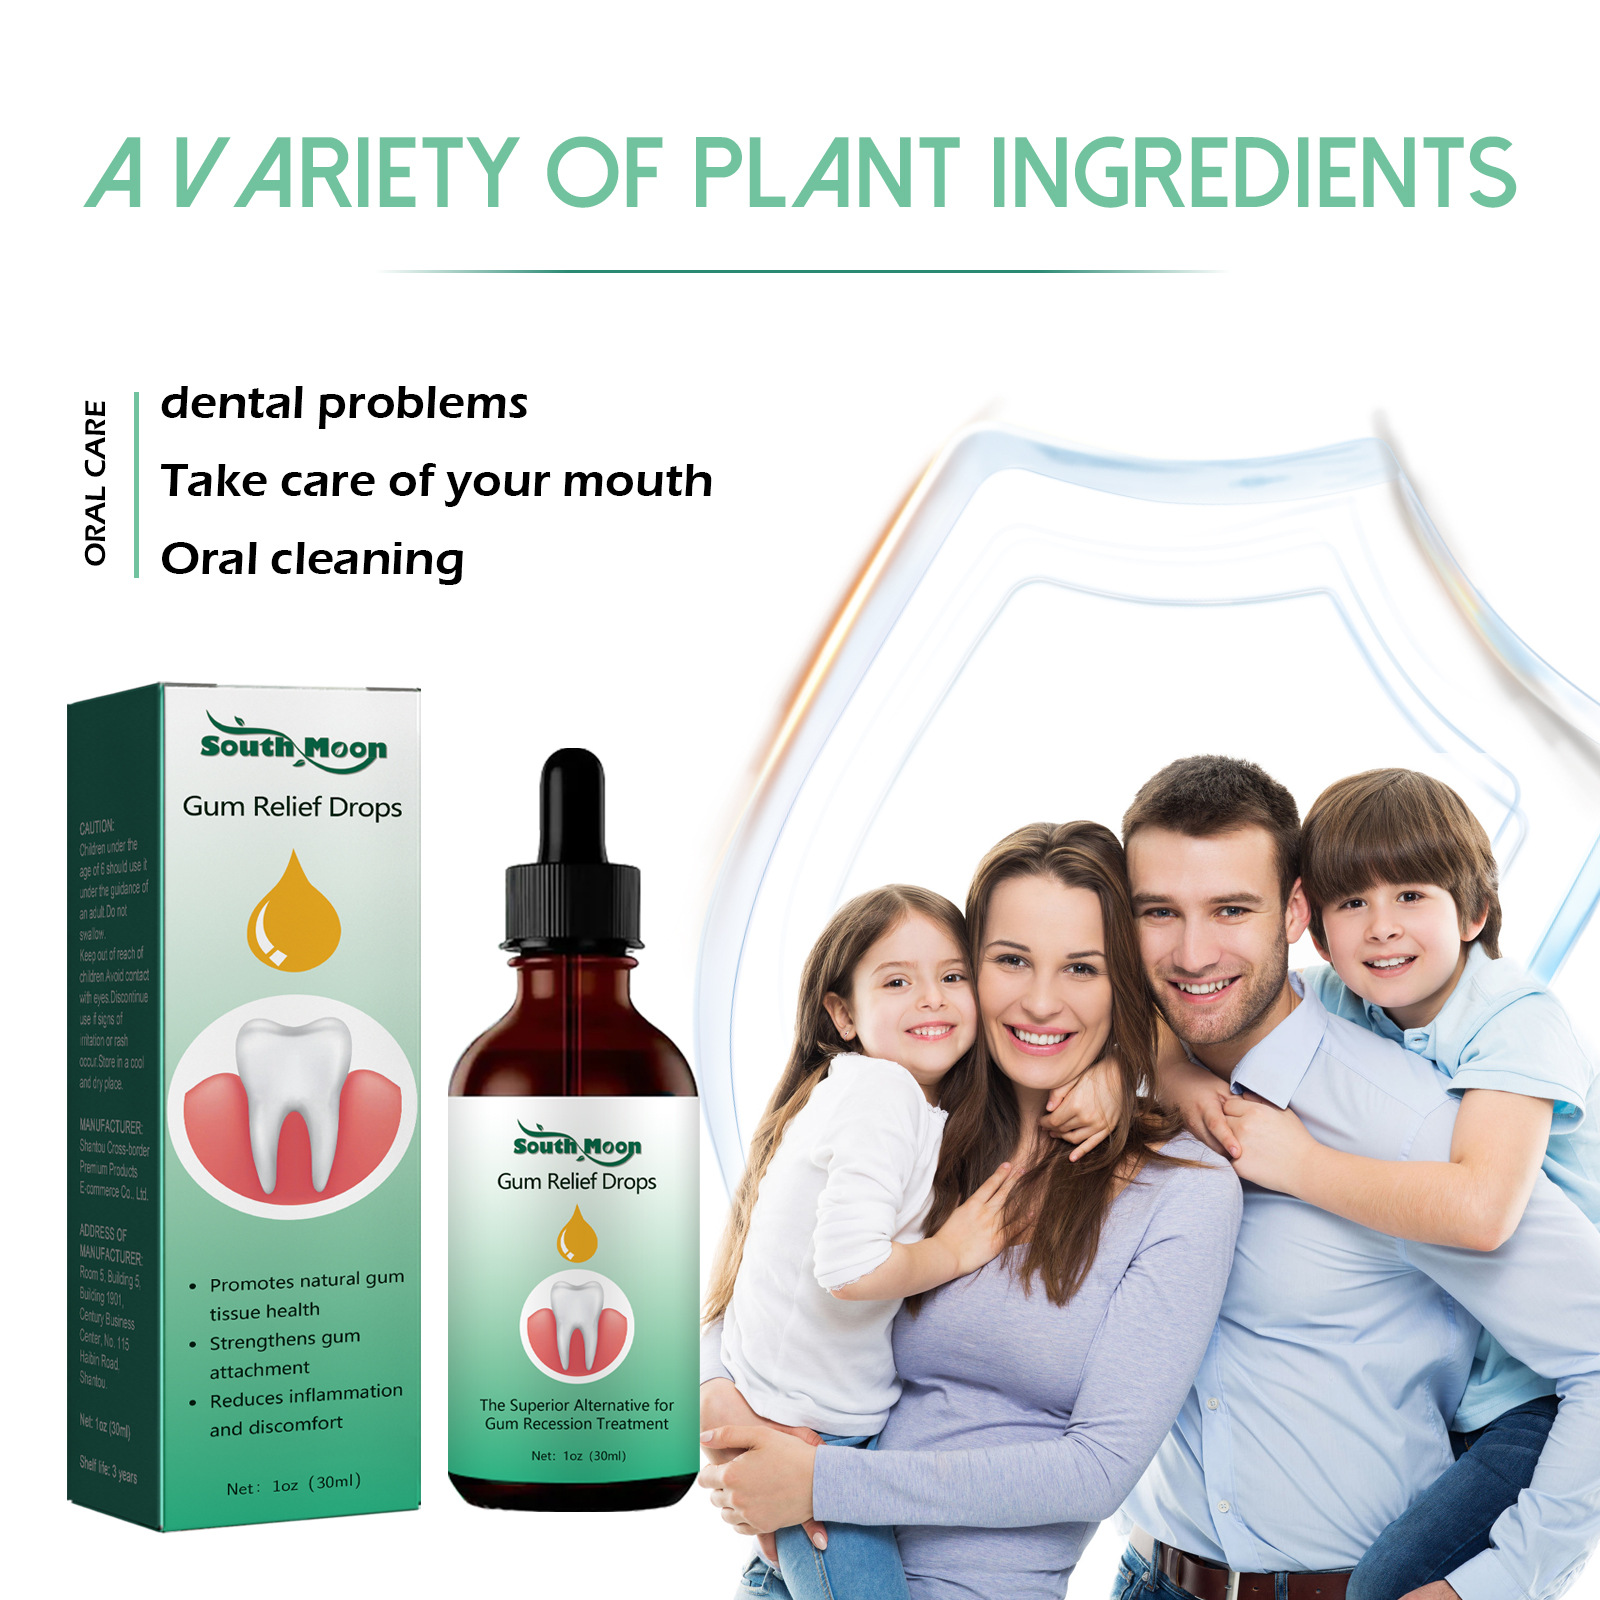 South Moon Gum Repair Drops Care Gum Relief Periodontal Foaming Oral Cleaning Care Drops